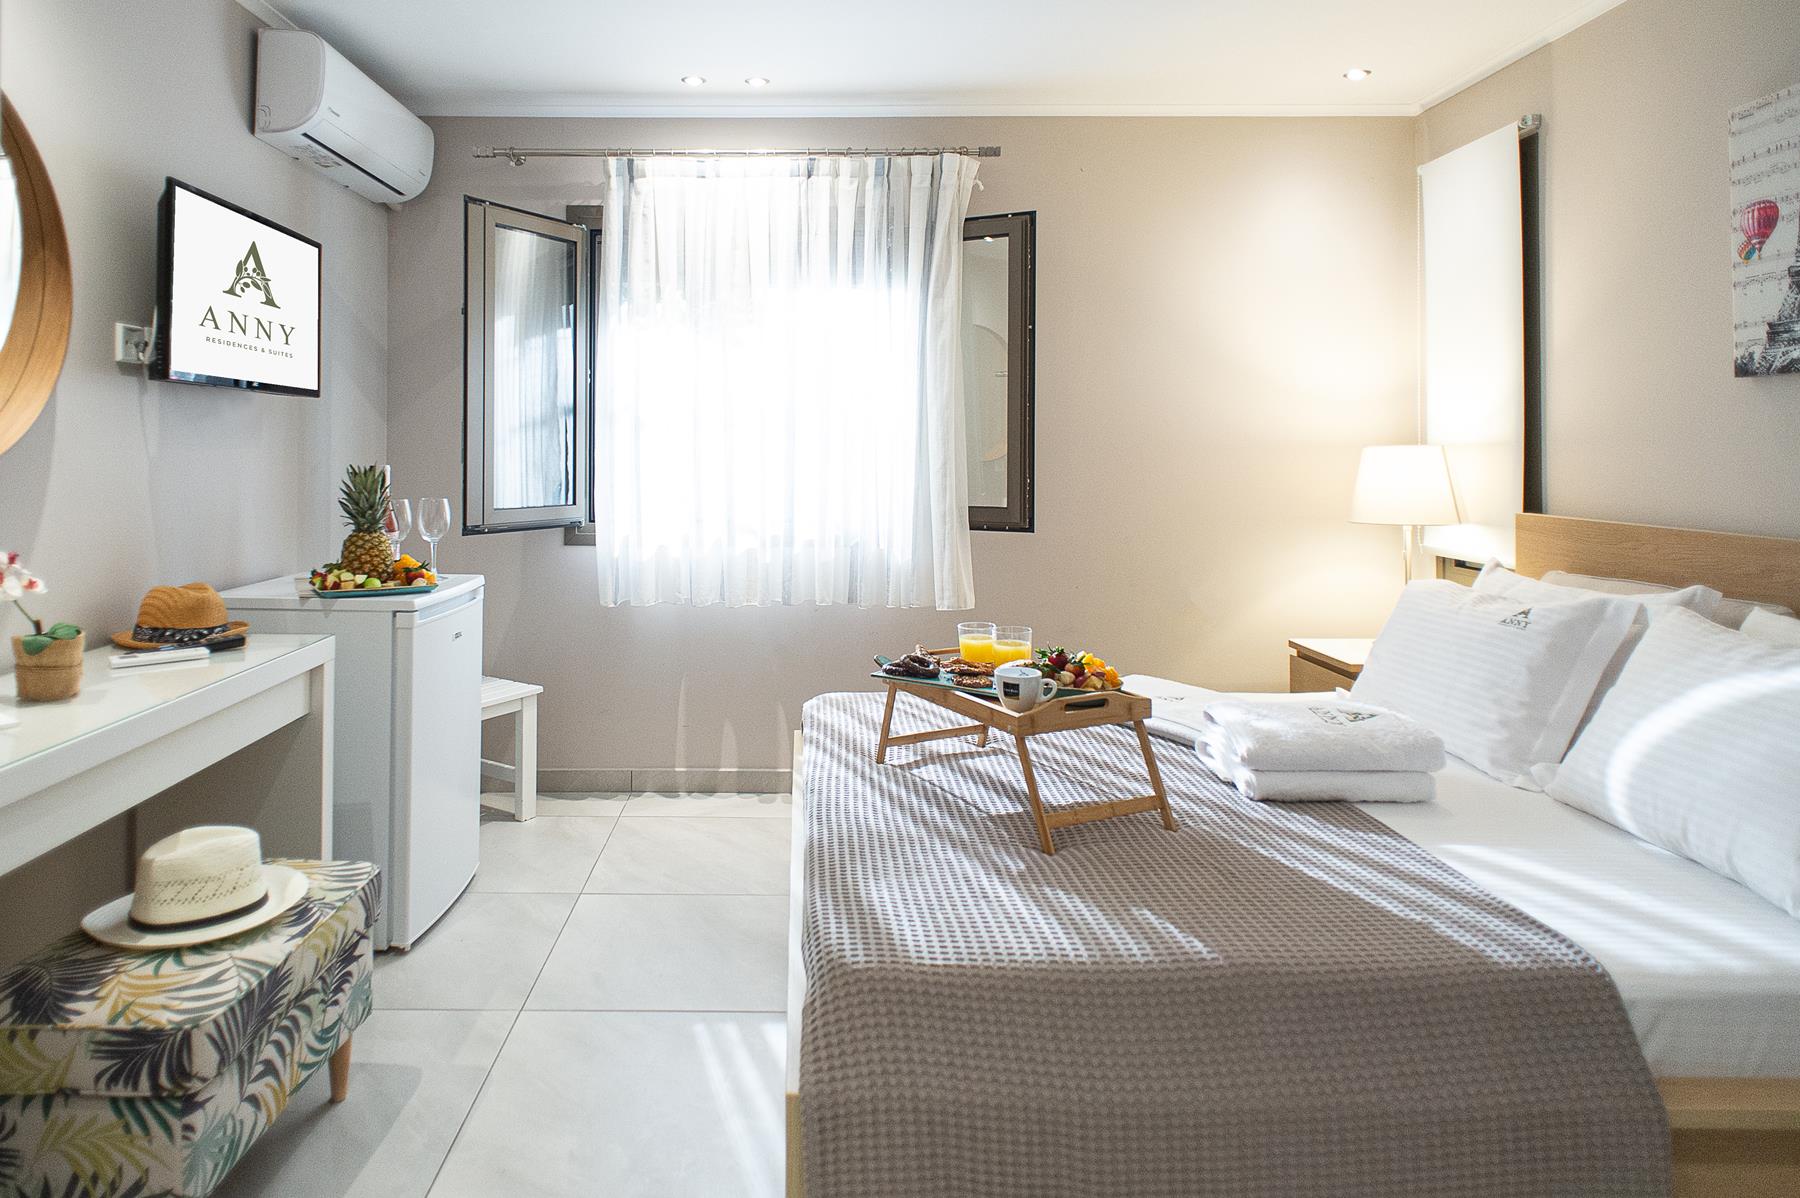 thassos apartments - Anny's Residences & Suites